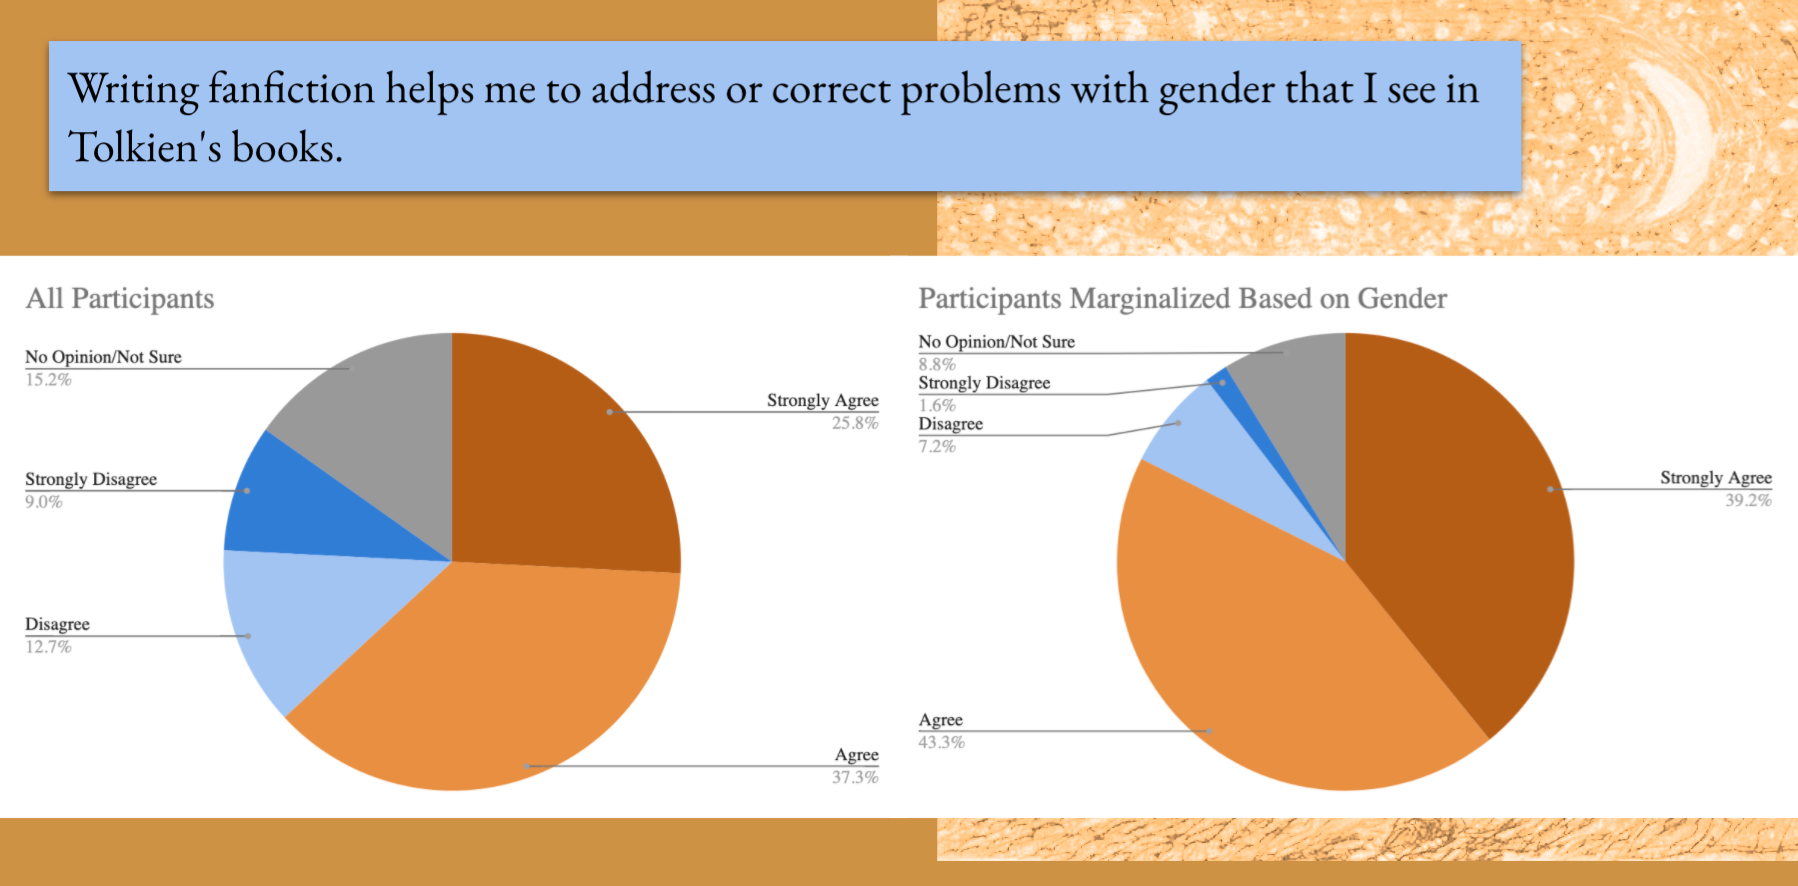 Fewer writers agree that they use fanfic to correct problems with gender in the legendarium, with writers marginalized based on gender agreeing more often